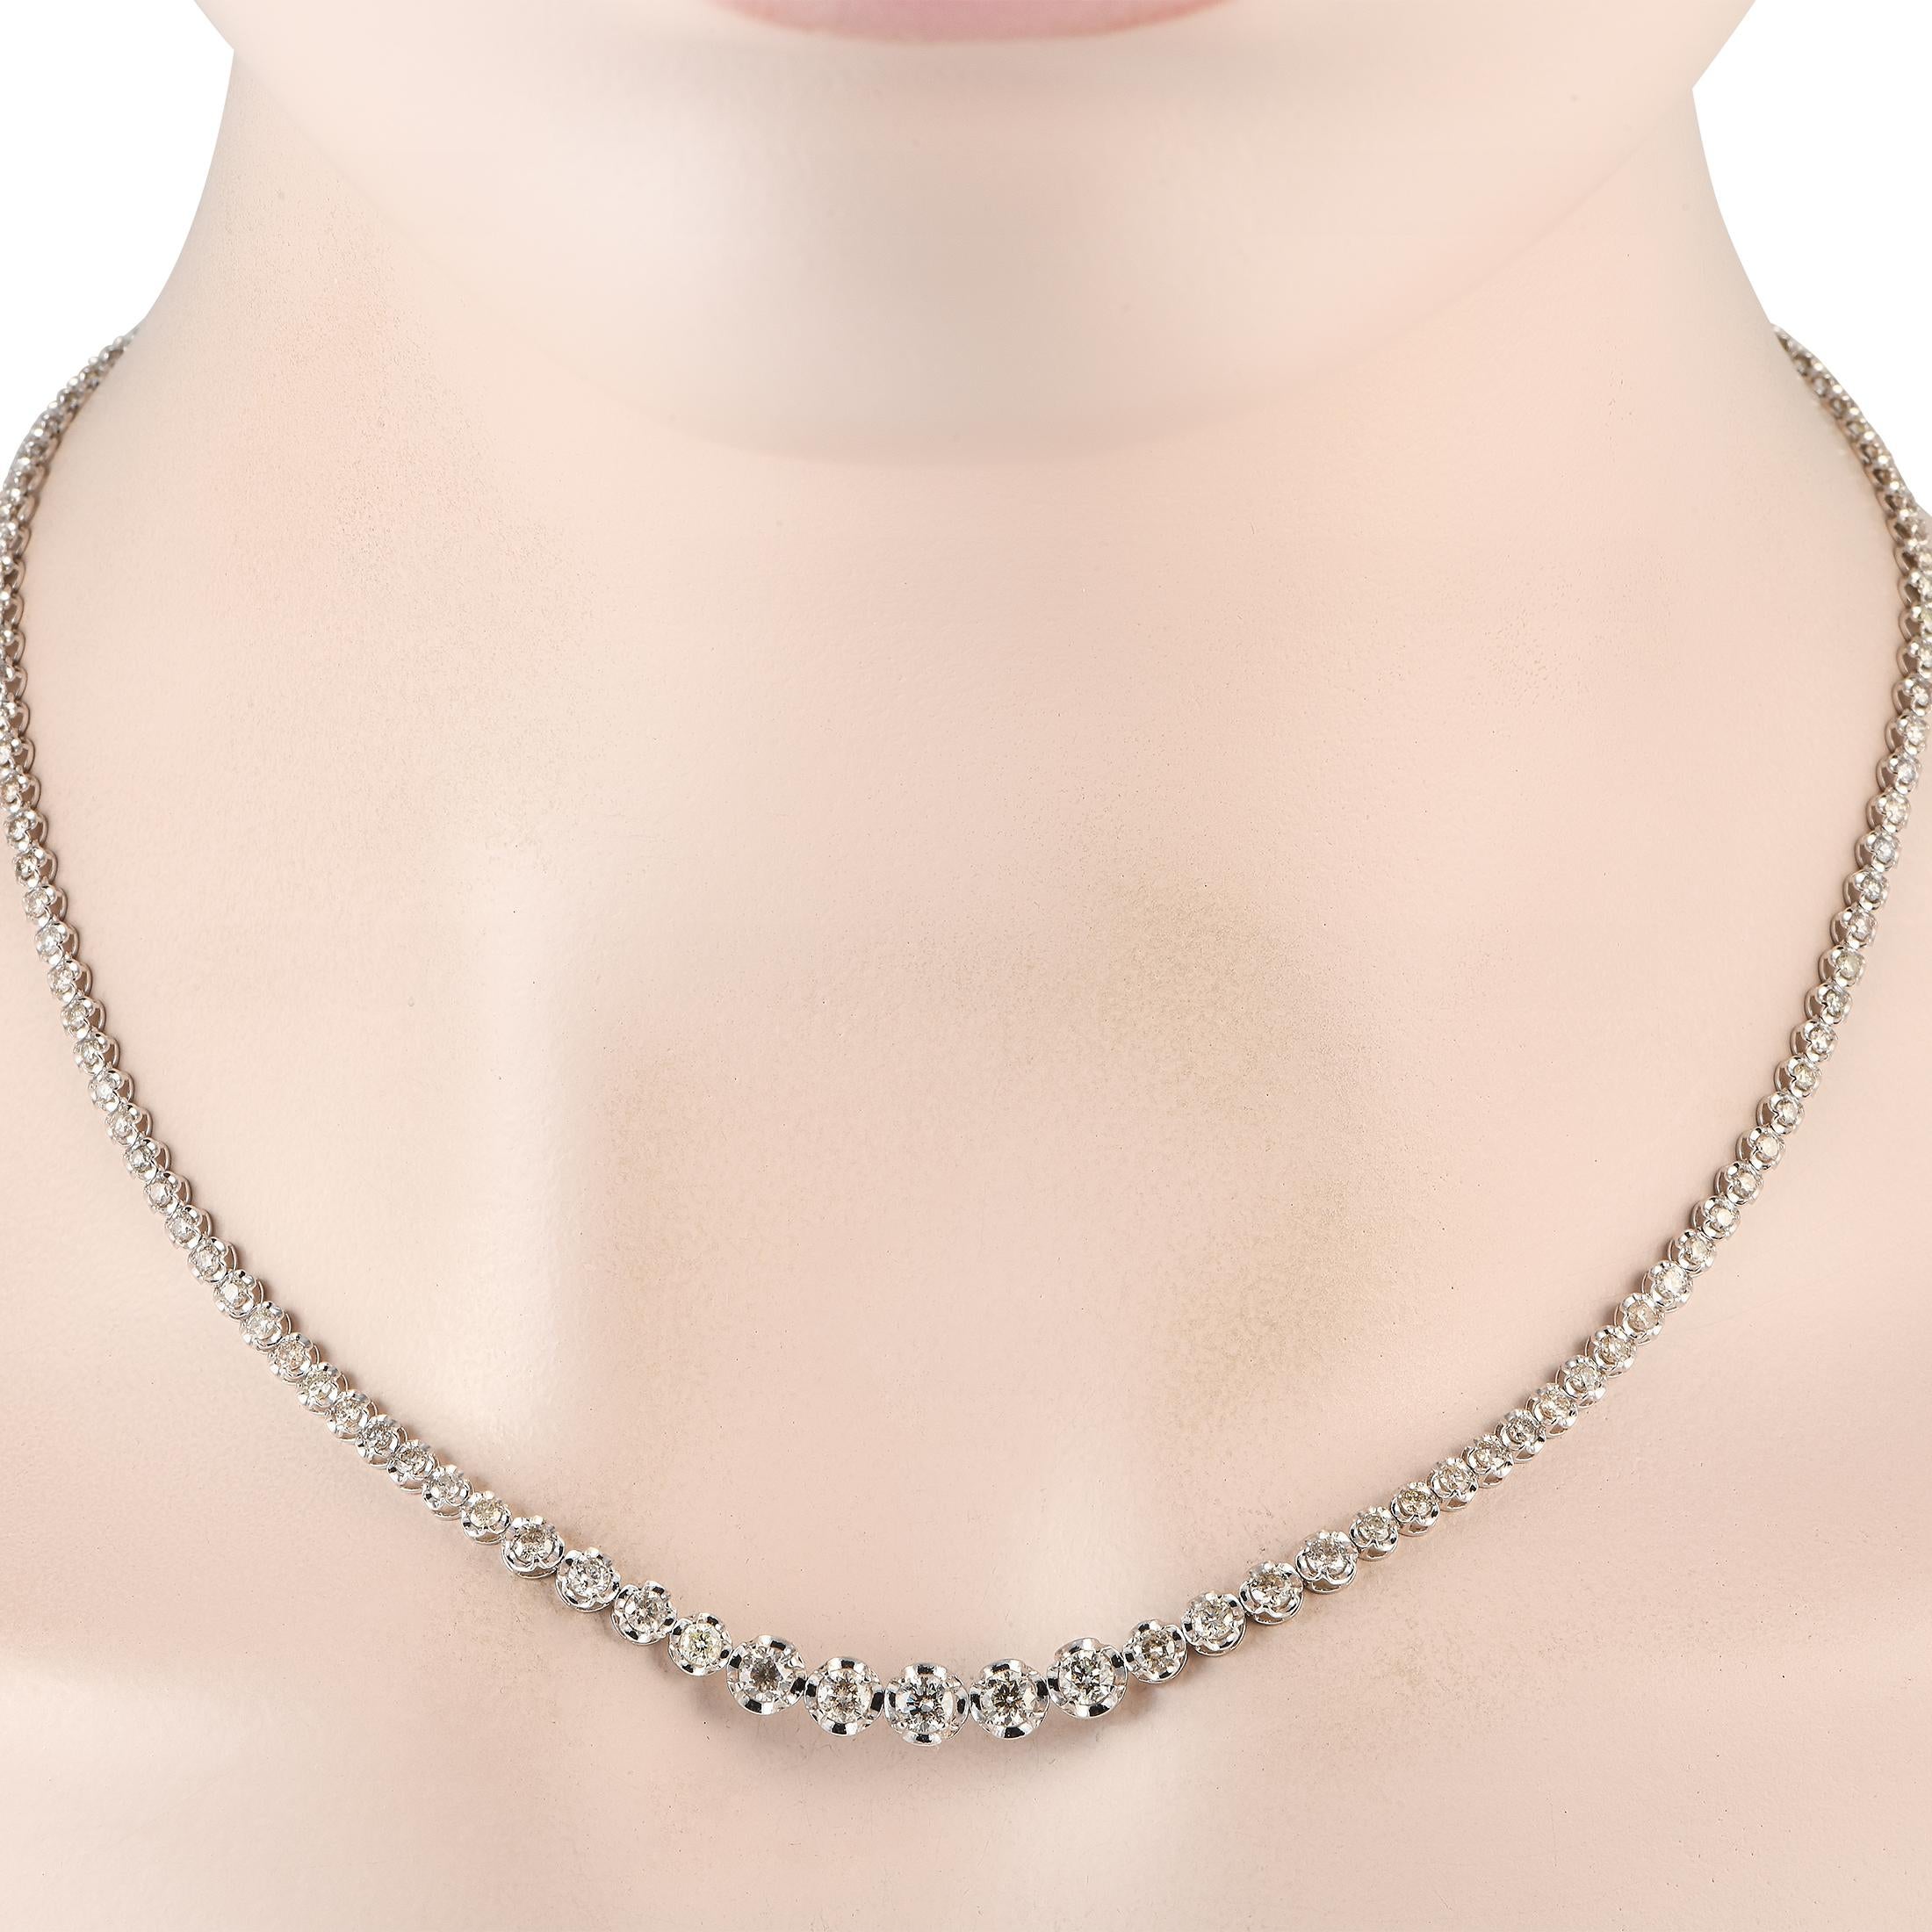 Elevate any ensemble with this simple, elegant necklace. This pieces impeccable design is elevated by sparkling diamonds totaling 5.0 carats and an 18K White Gold setting measuring 18 long.This jewelry piece is offered in brand new condition and